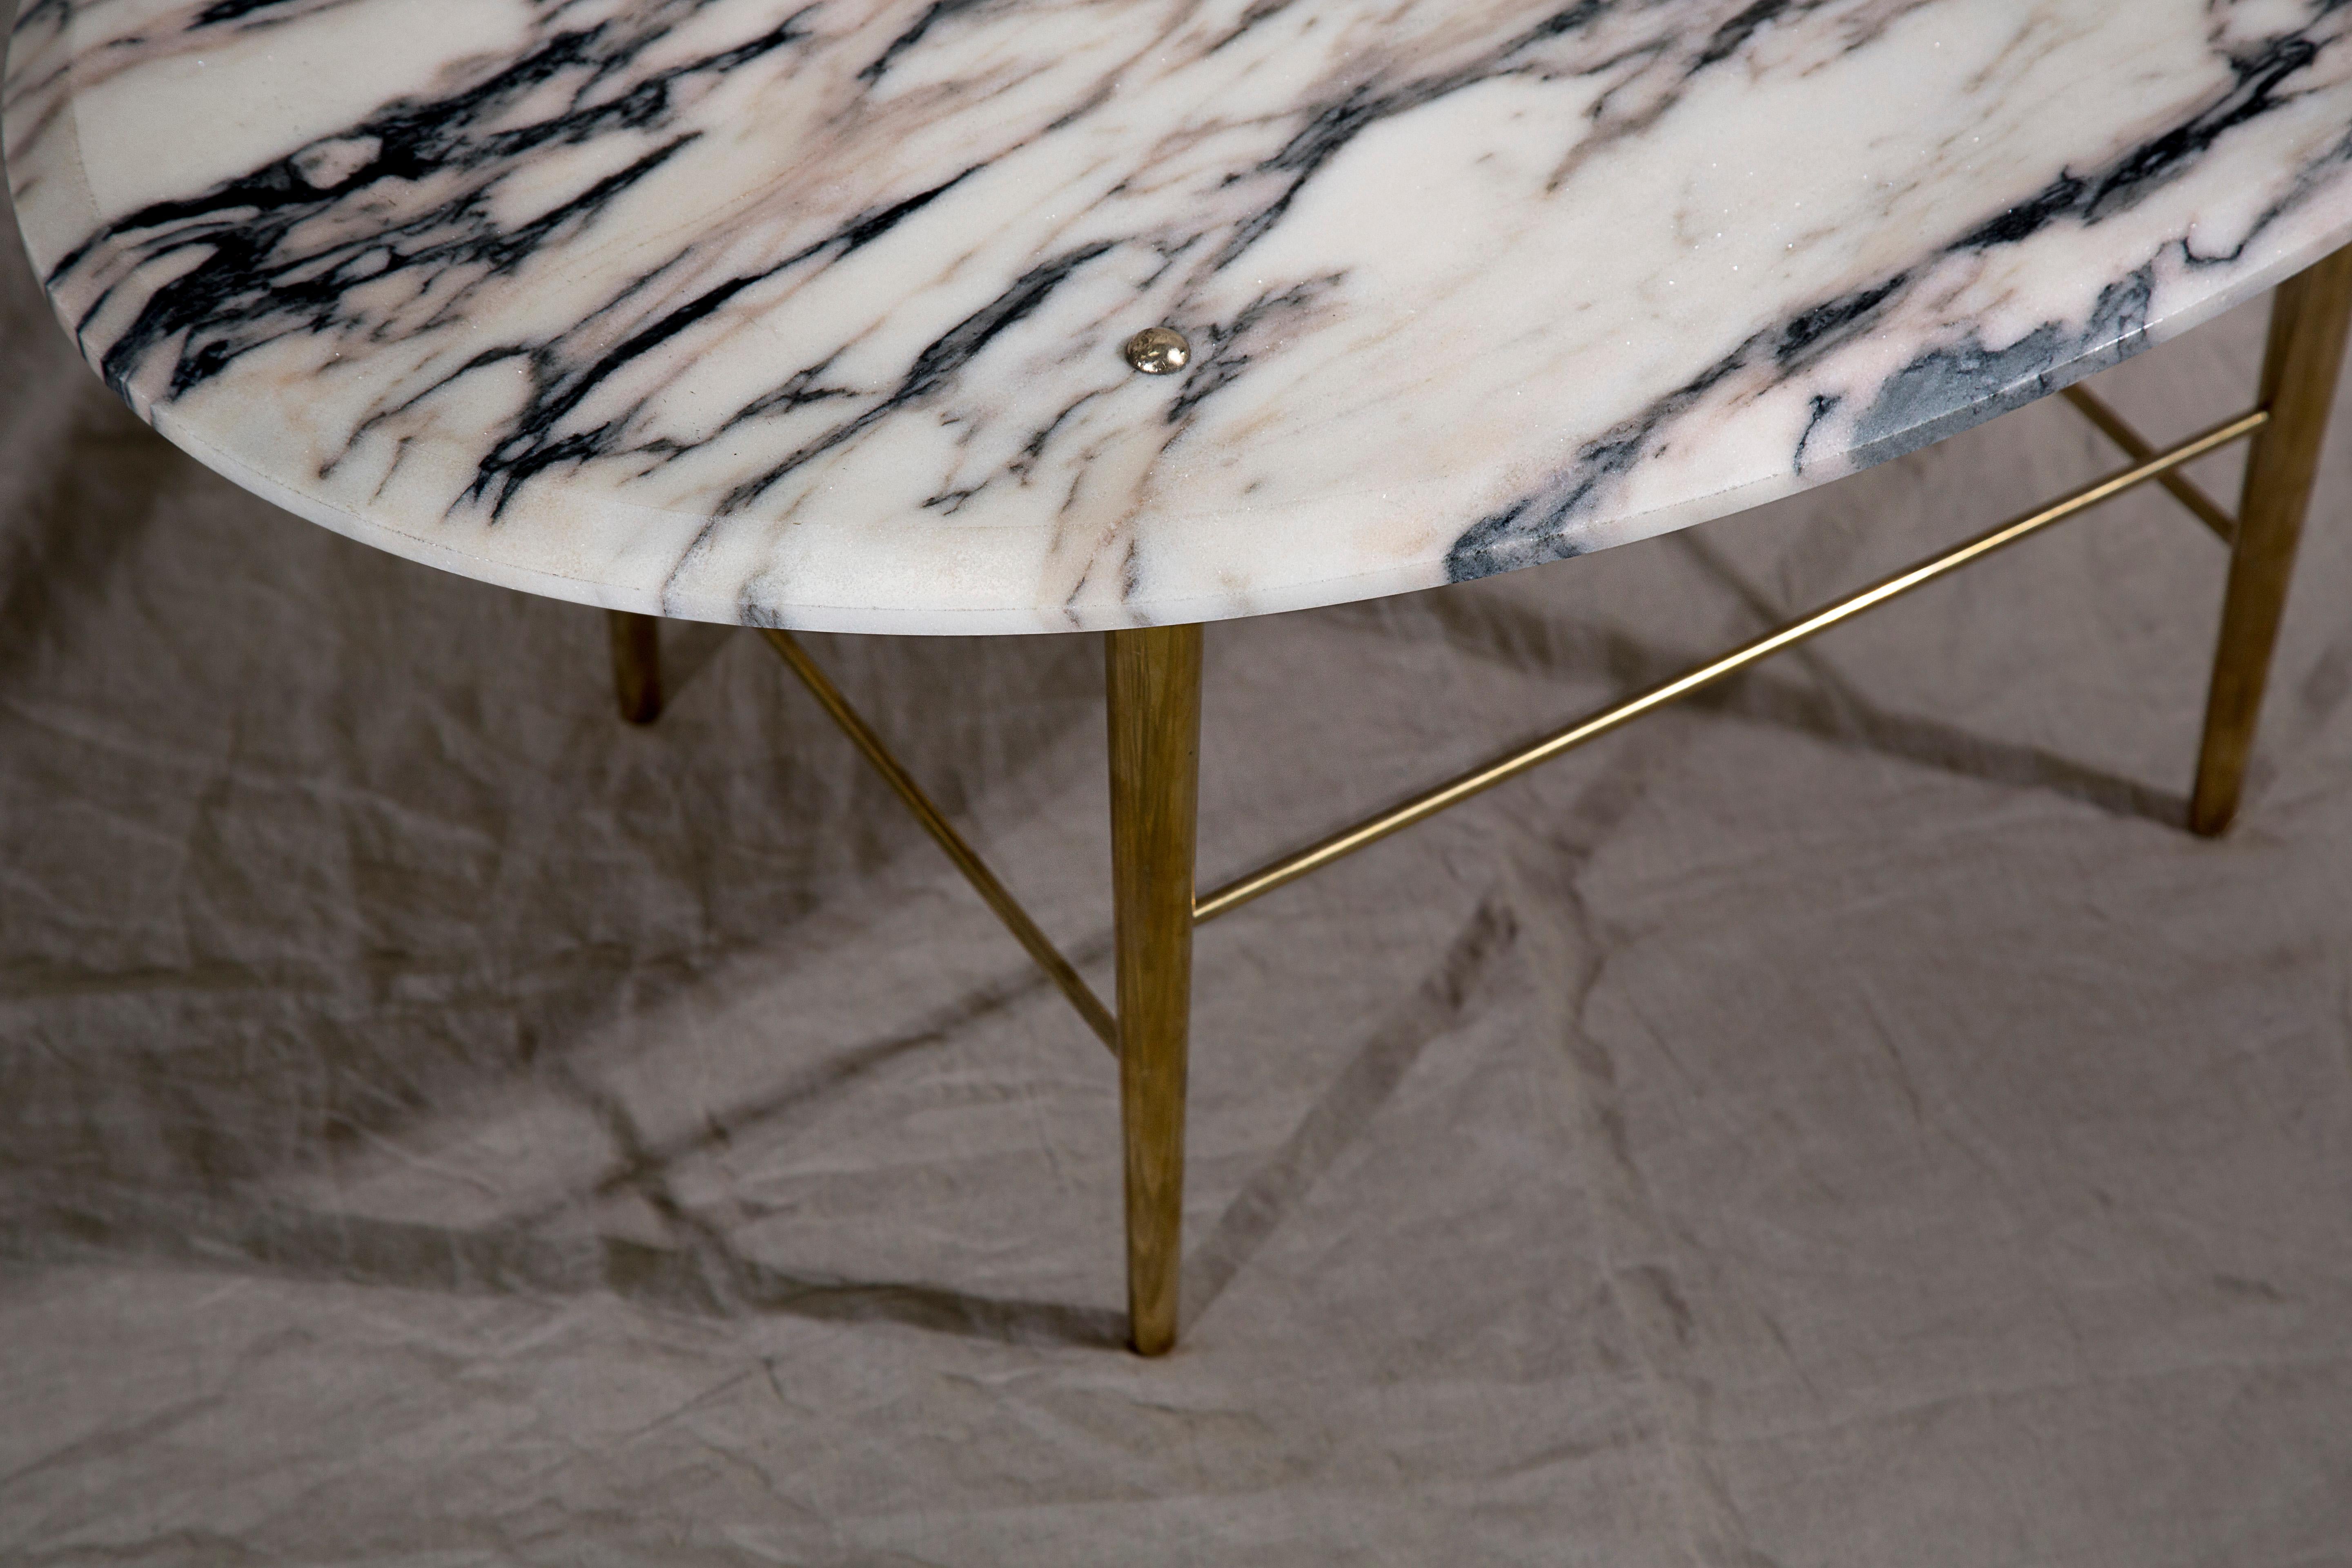 Modern Stud Coffee Table in Vulcanatta Marble and Polished Brass — Large For Sale